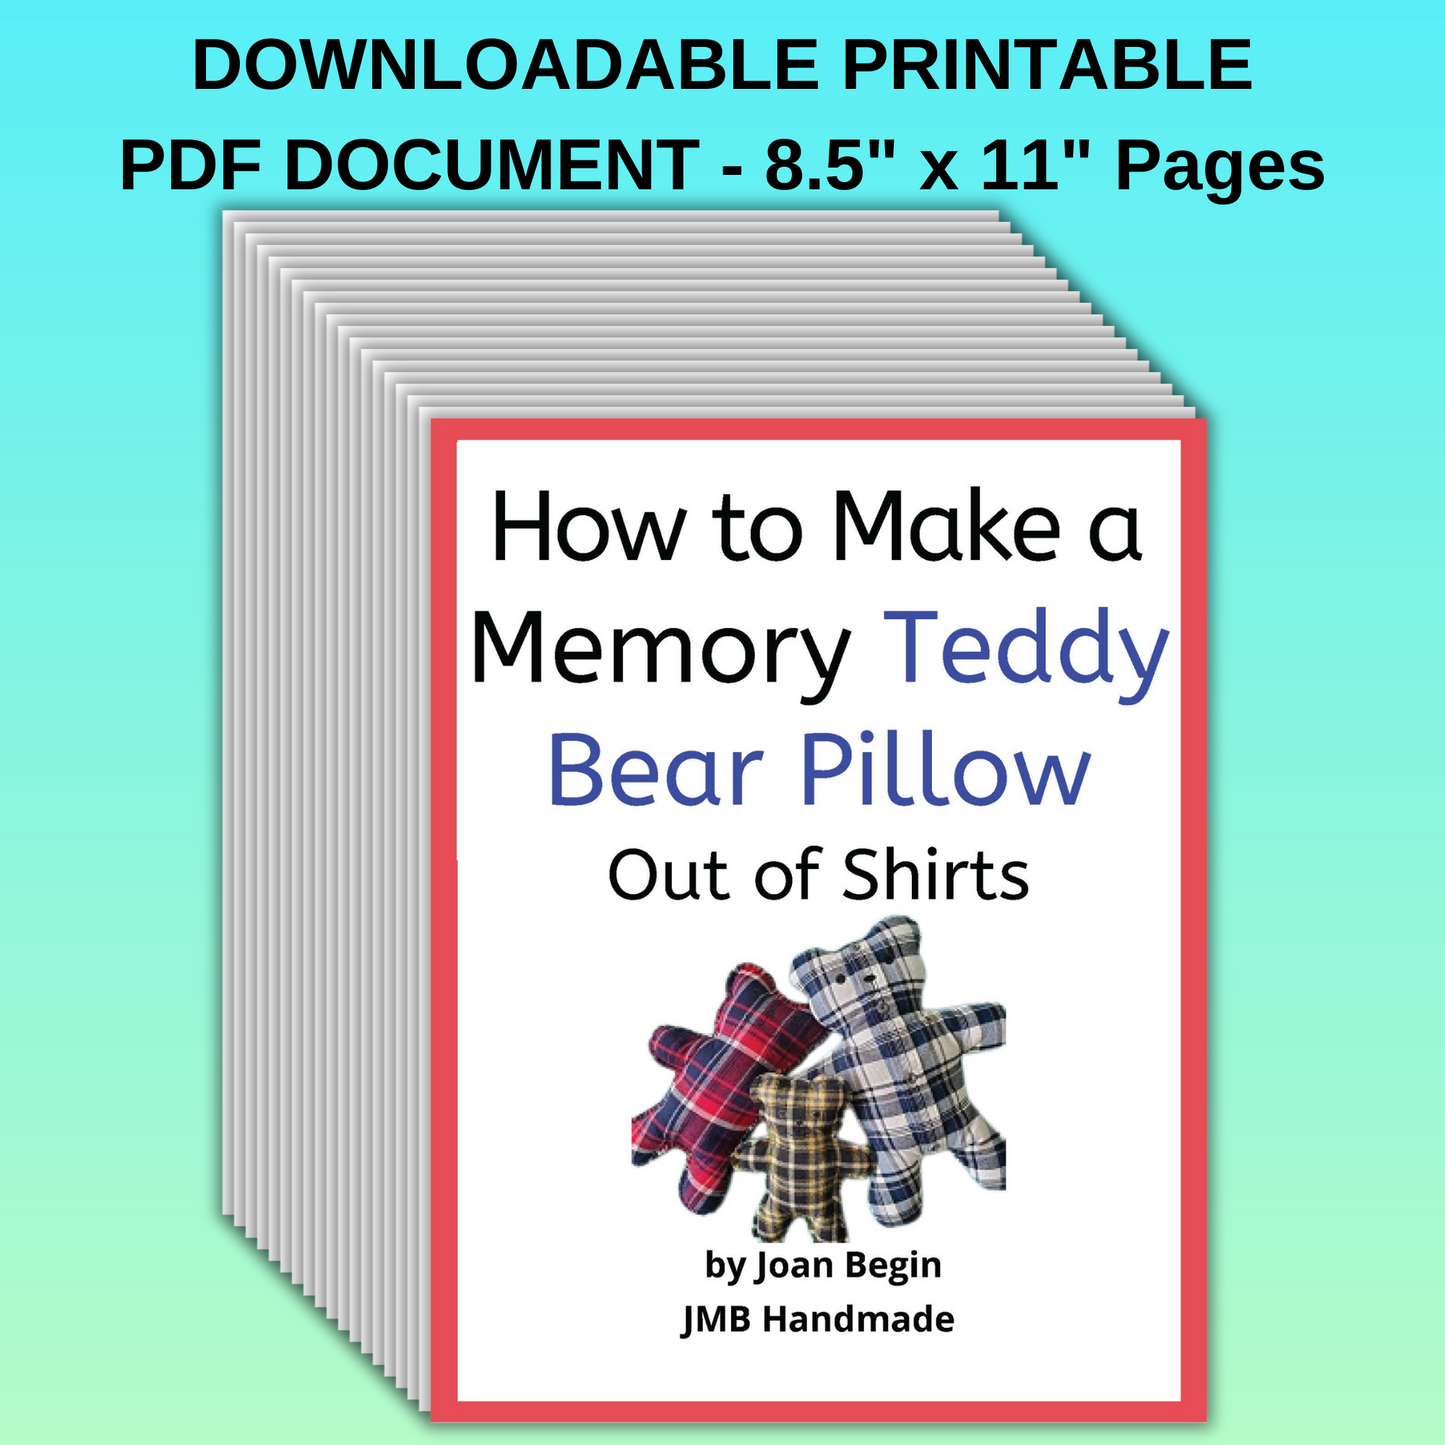 JMB Handmade / How to Make a Memory Teddy Bear Pillow Sewing Tutorial - Printable Step-By-Step Instructions / Downloadable PDF Pages